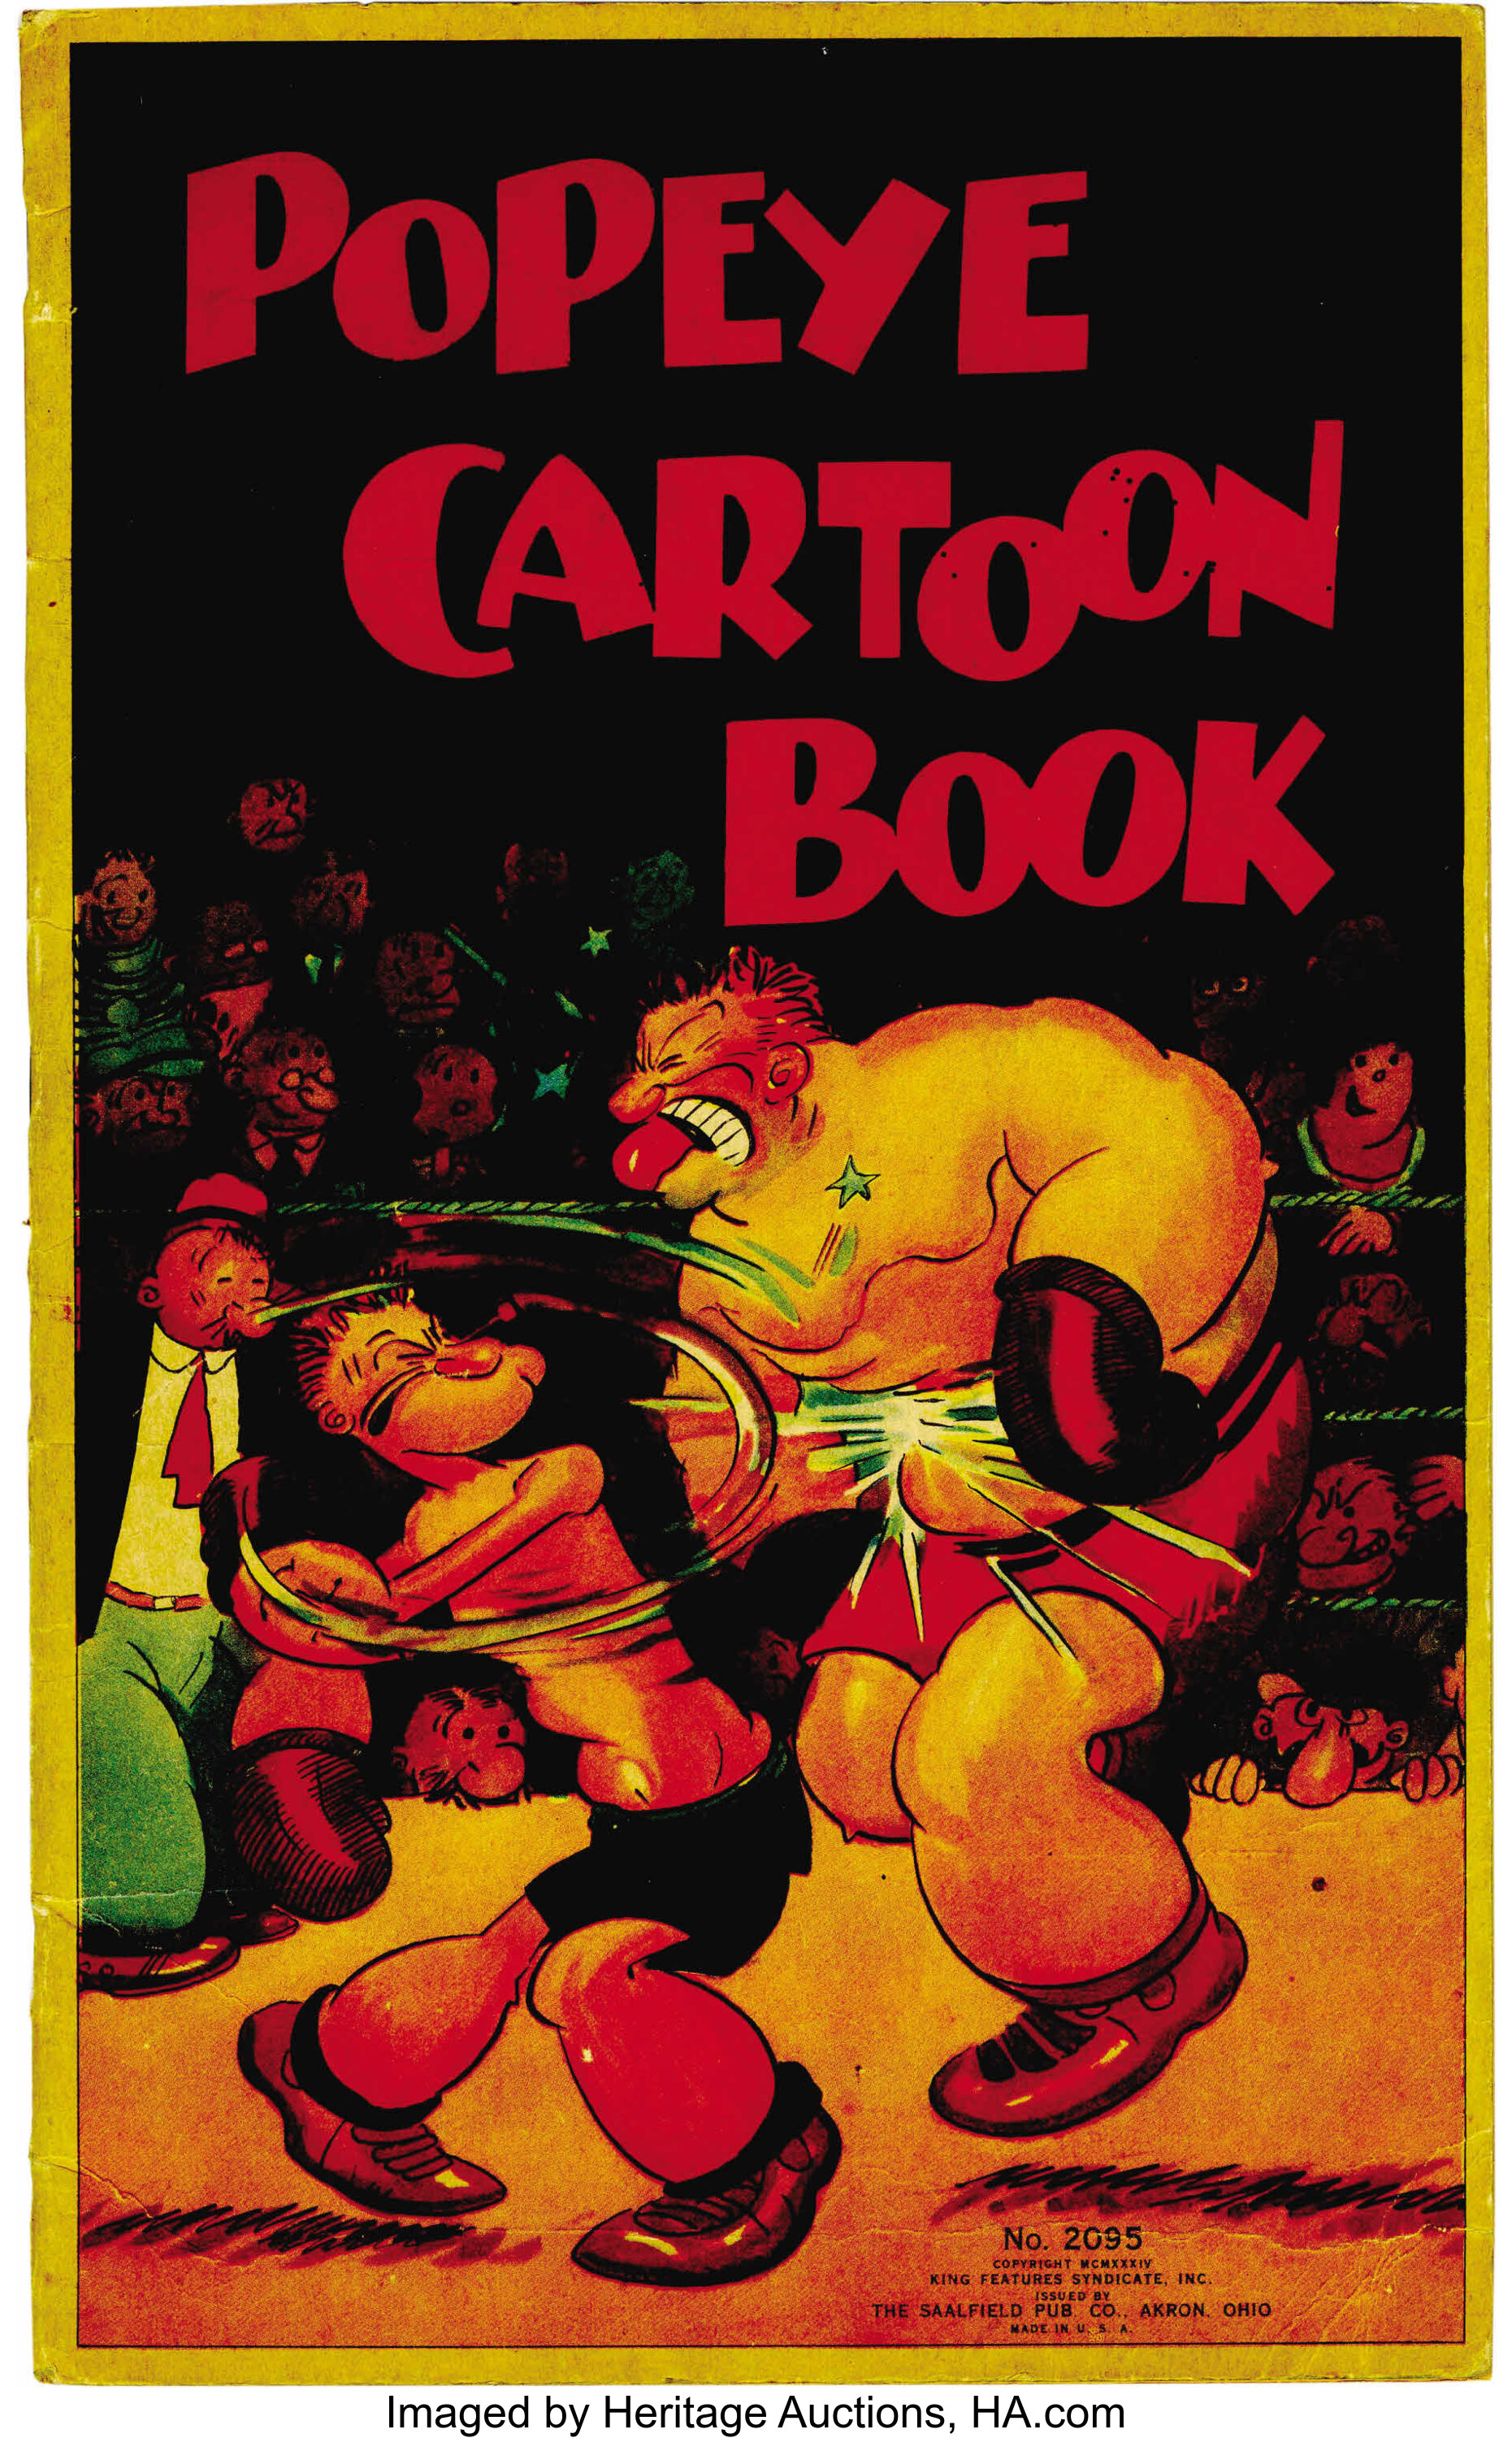 Popeye Cartoon Book Comics Values and Price Guide | Heritage Auctions